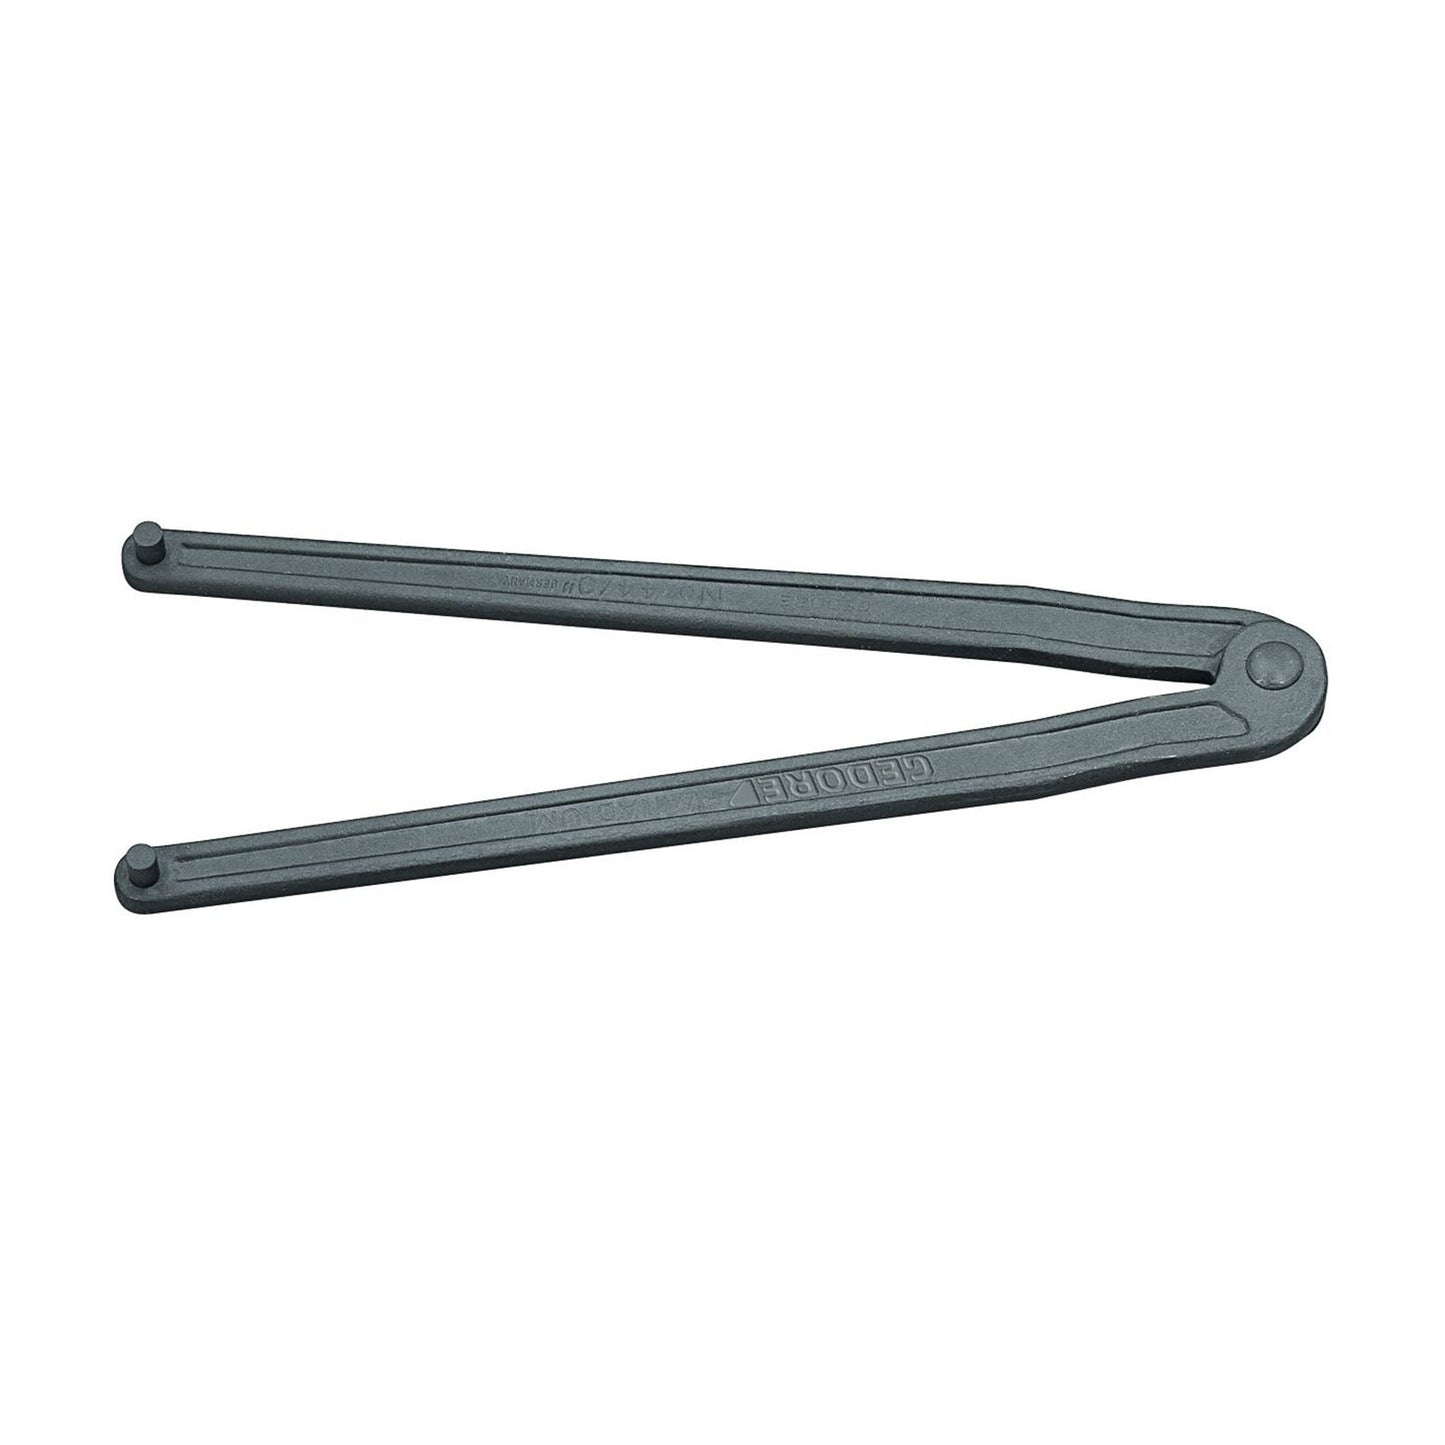 GEDORE 44 3 - Double Pivot Wrench, 3mm (6354480)